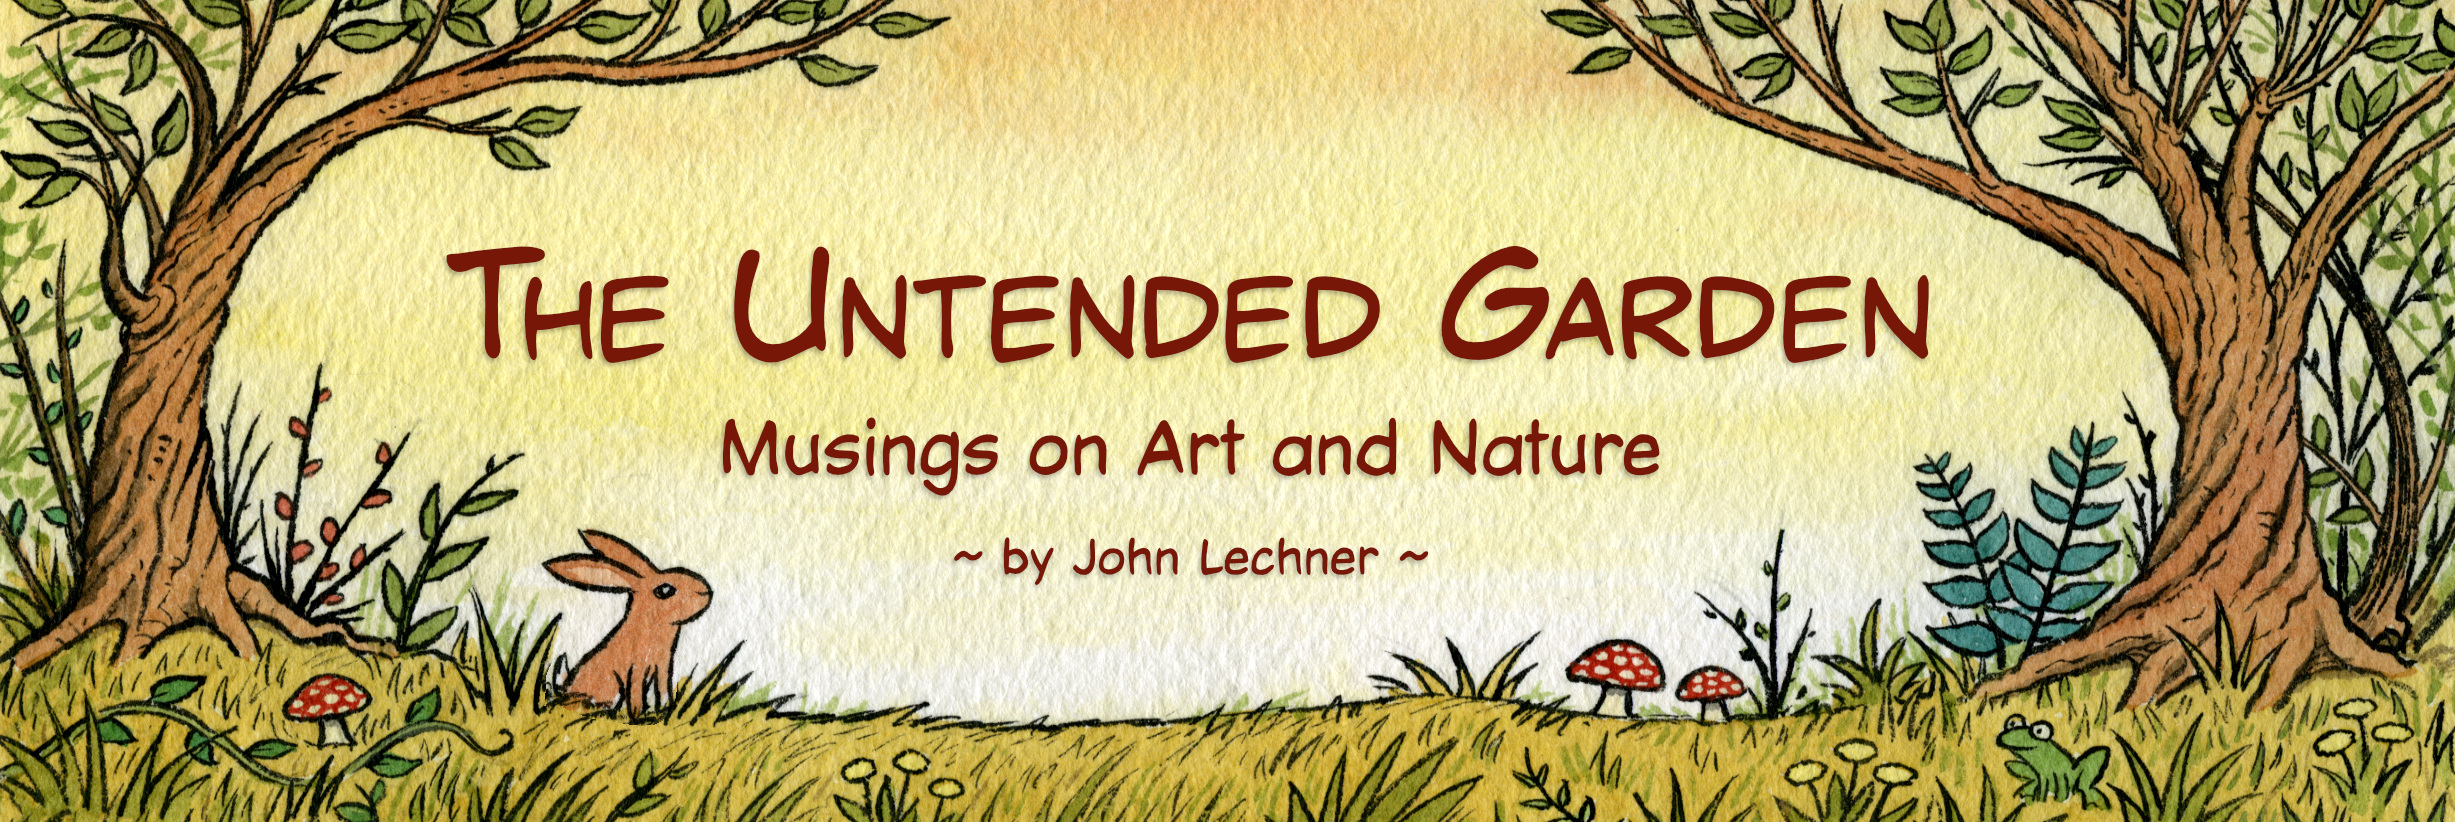 The Untended Garden - Musings on Art and Nature - by John Lechner